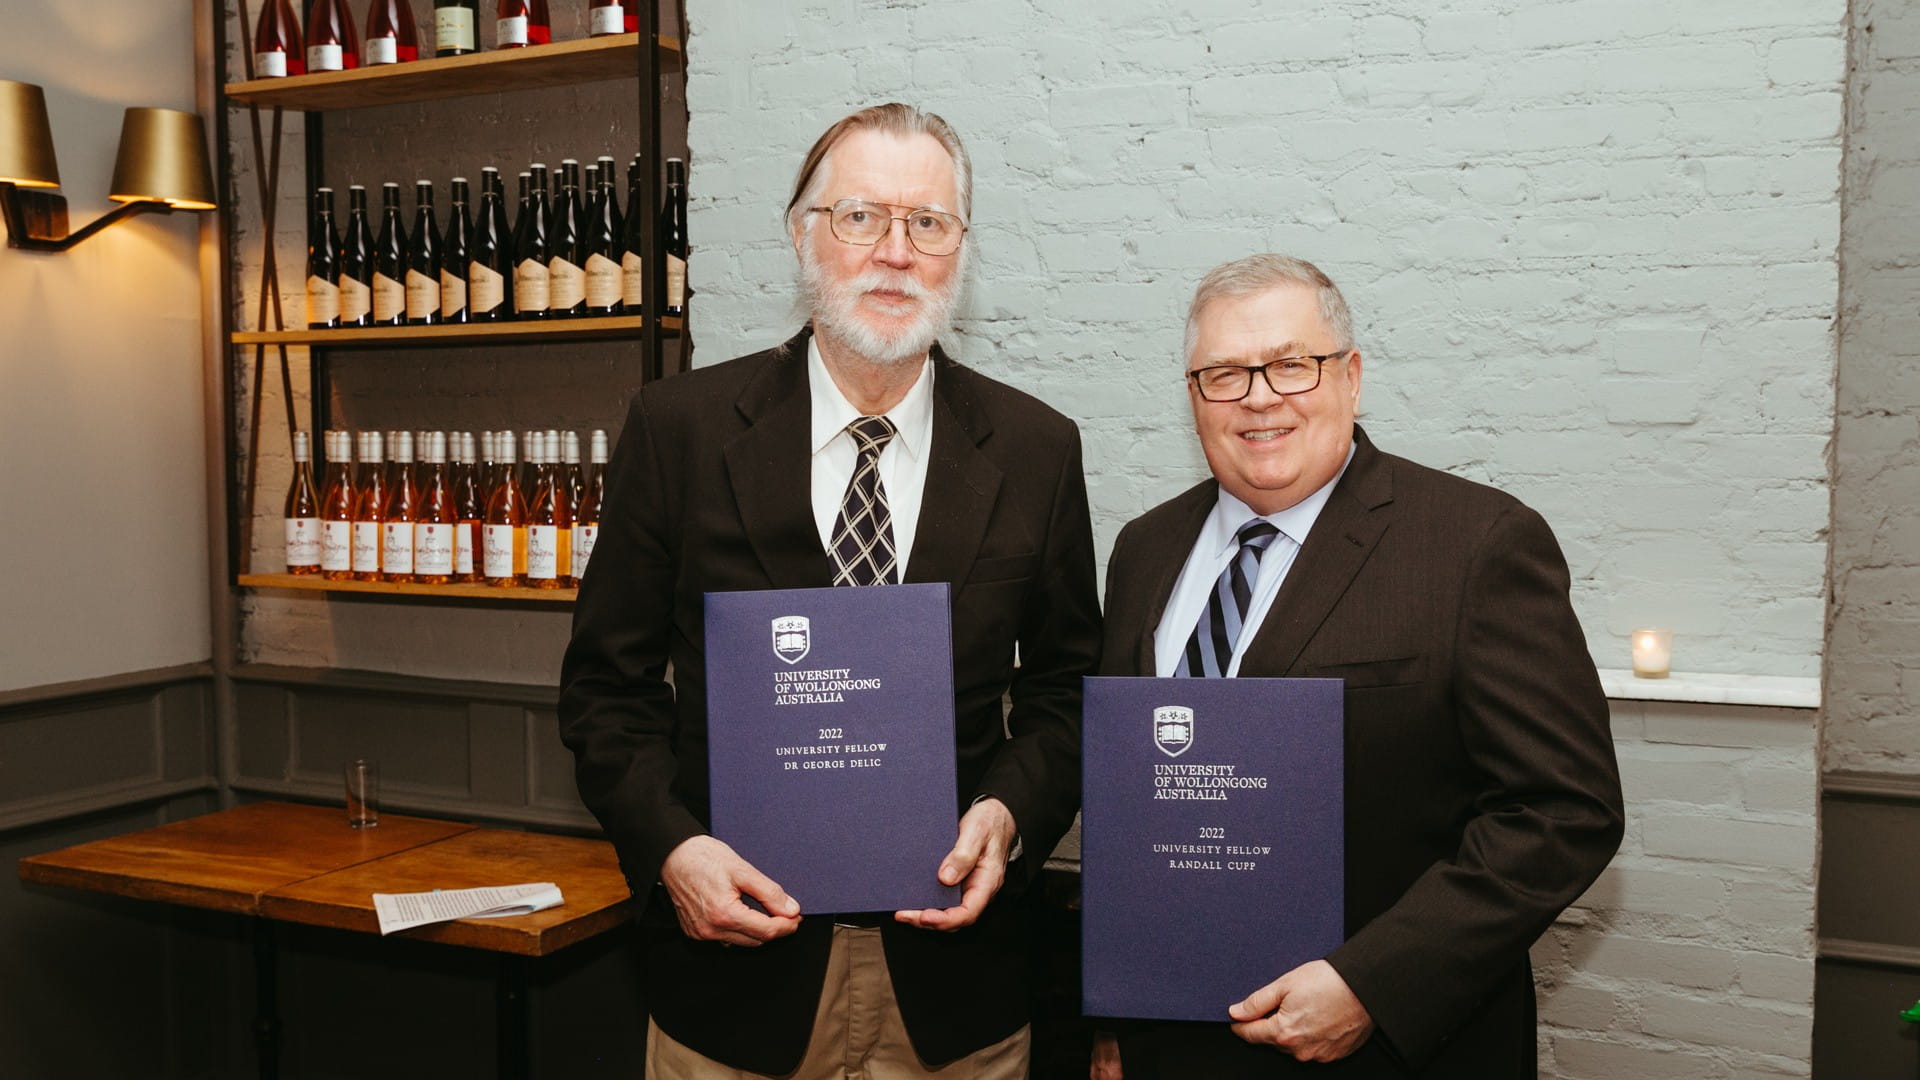 Dr George Delic and Mr Randall Cupp both hold blue books signifying their UOW Fellowships. They stand side by side in a restaurant, against a white wall.